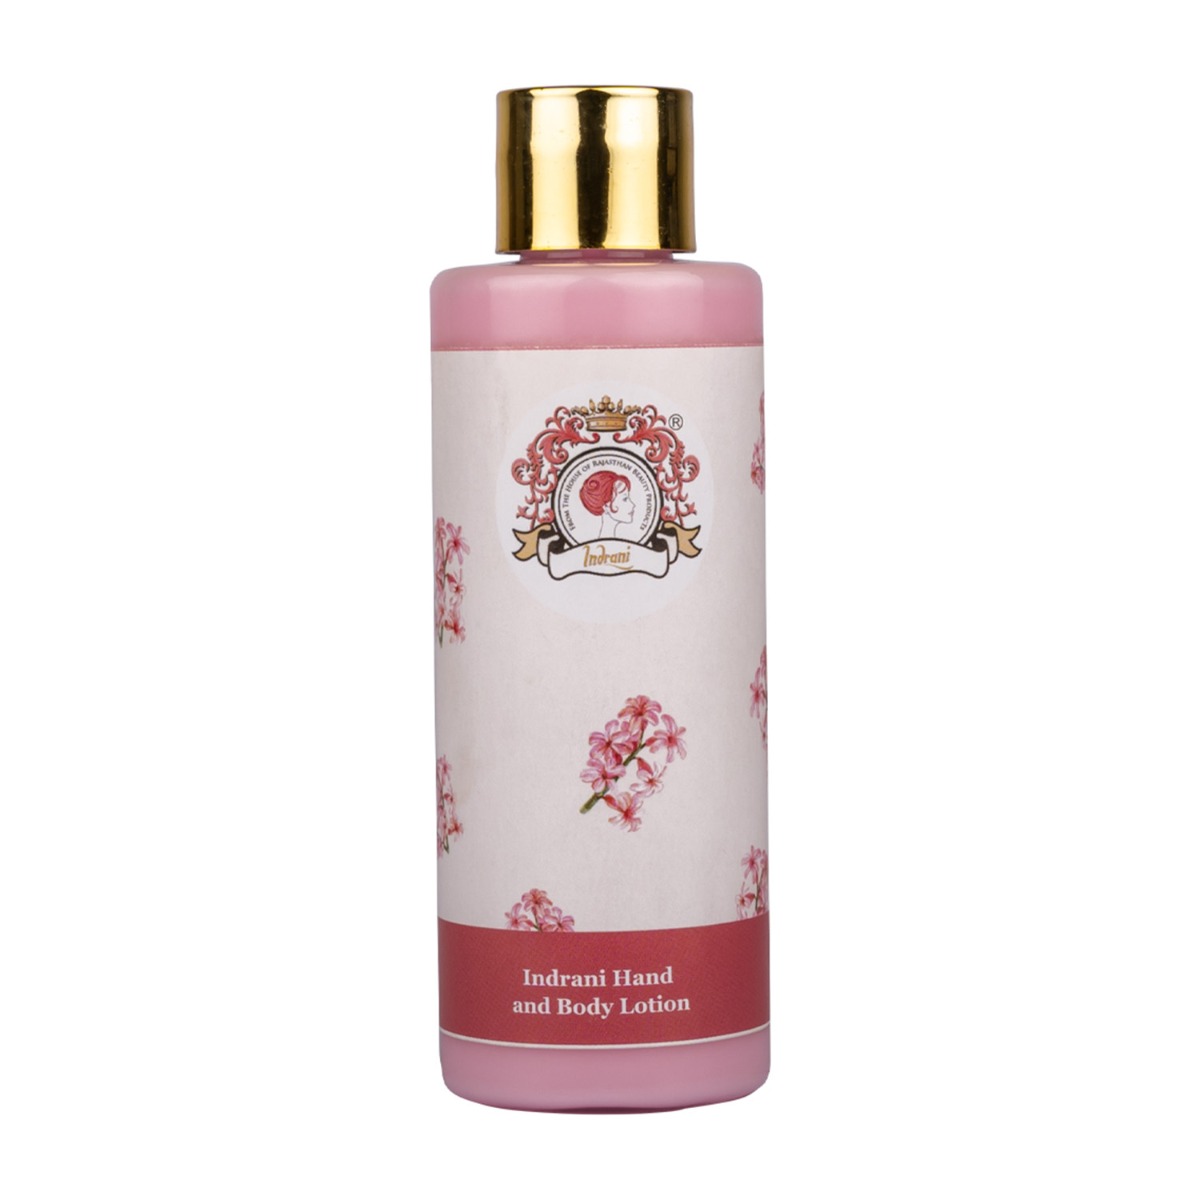 Indrani Hand And Body Lotion, 100ml